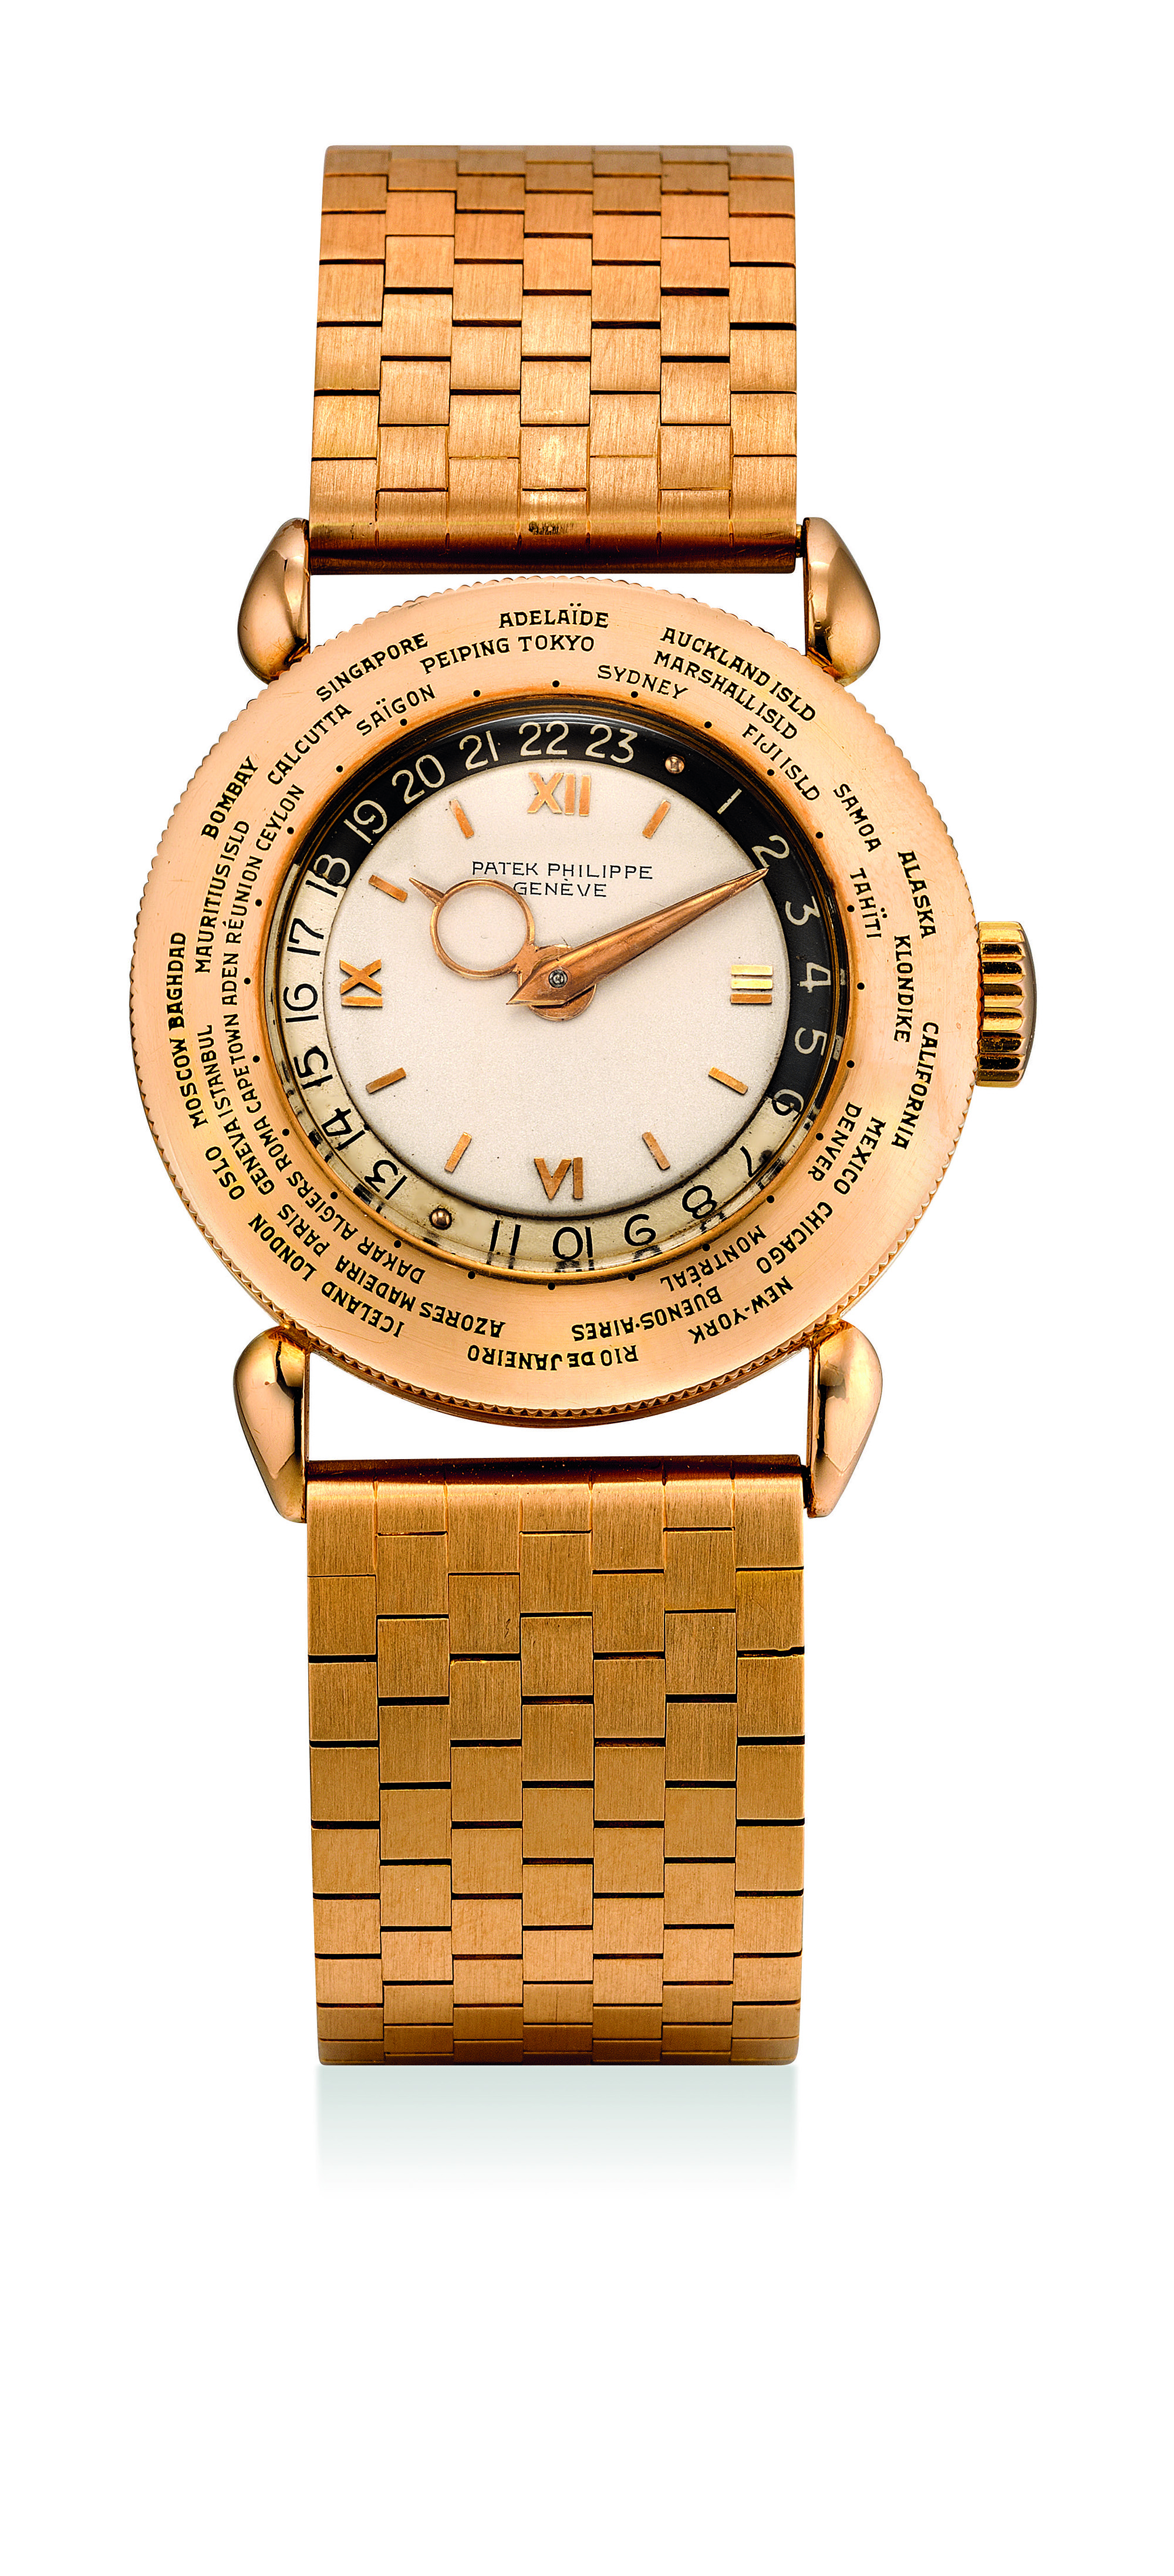  An extremely fine and impressive pink gold worldtime wristwatch with bracelet, reference 1415, manufactured in 1948